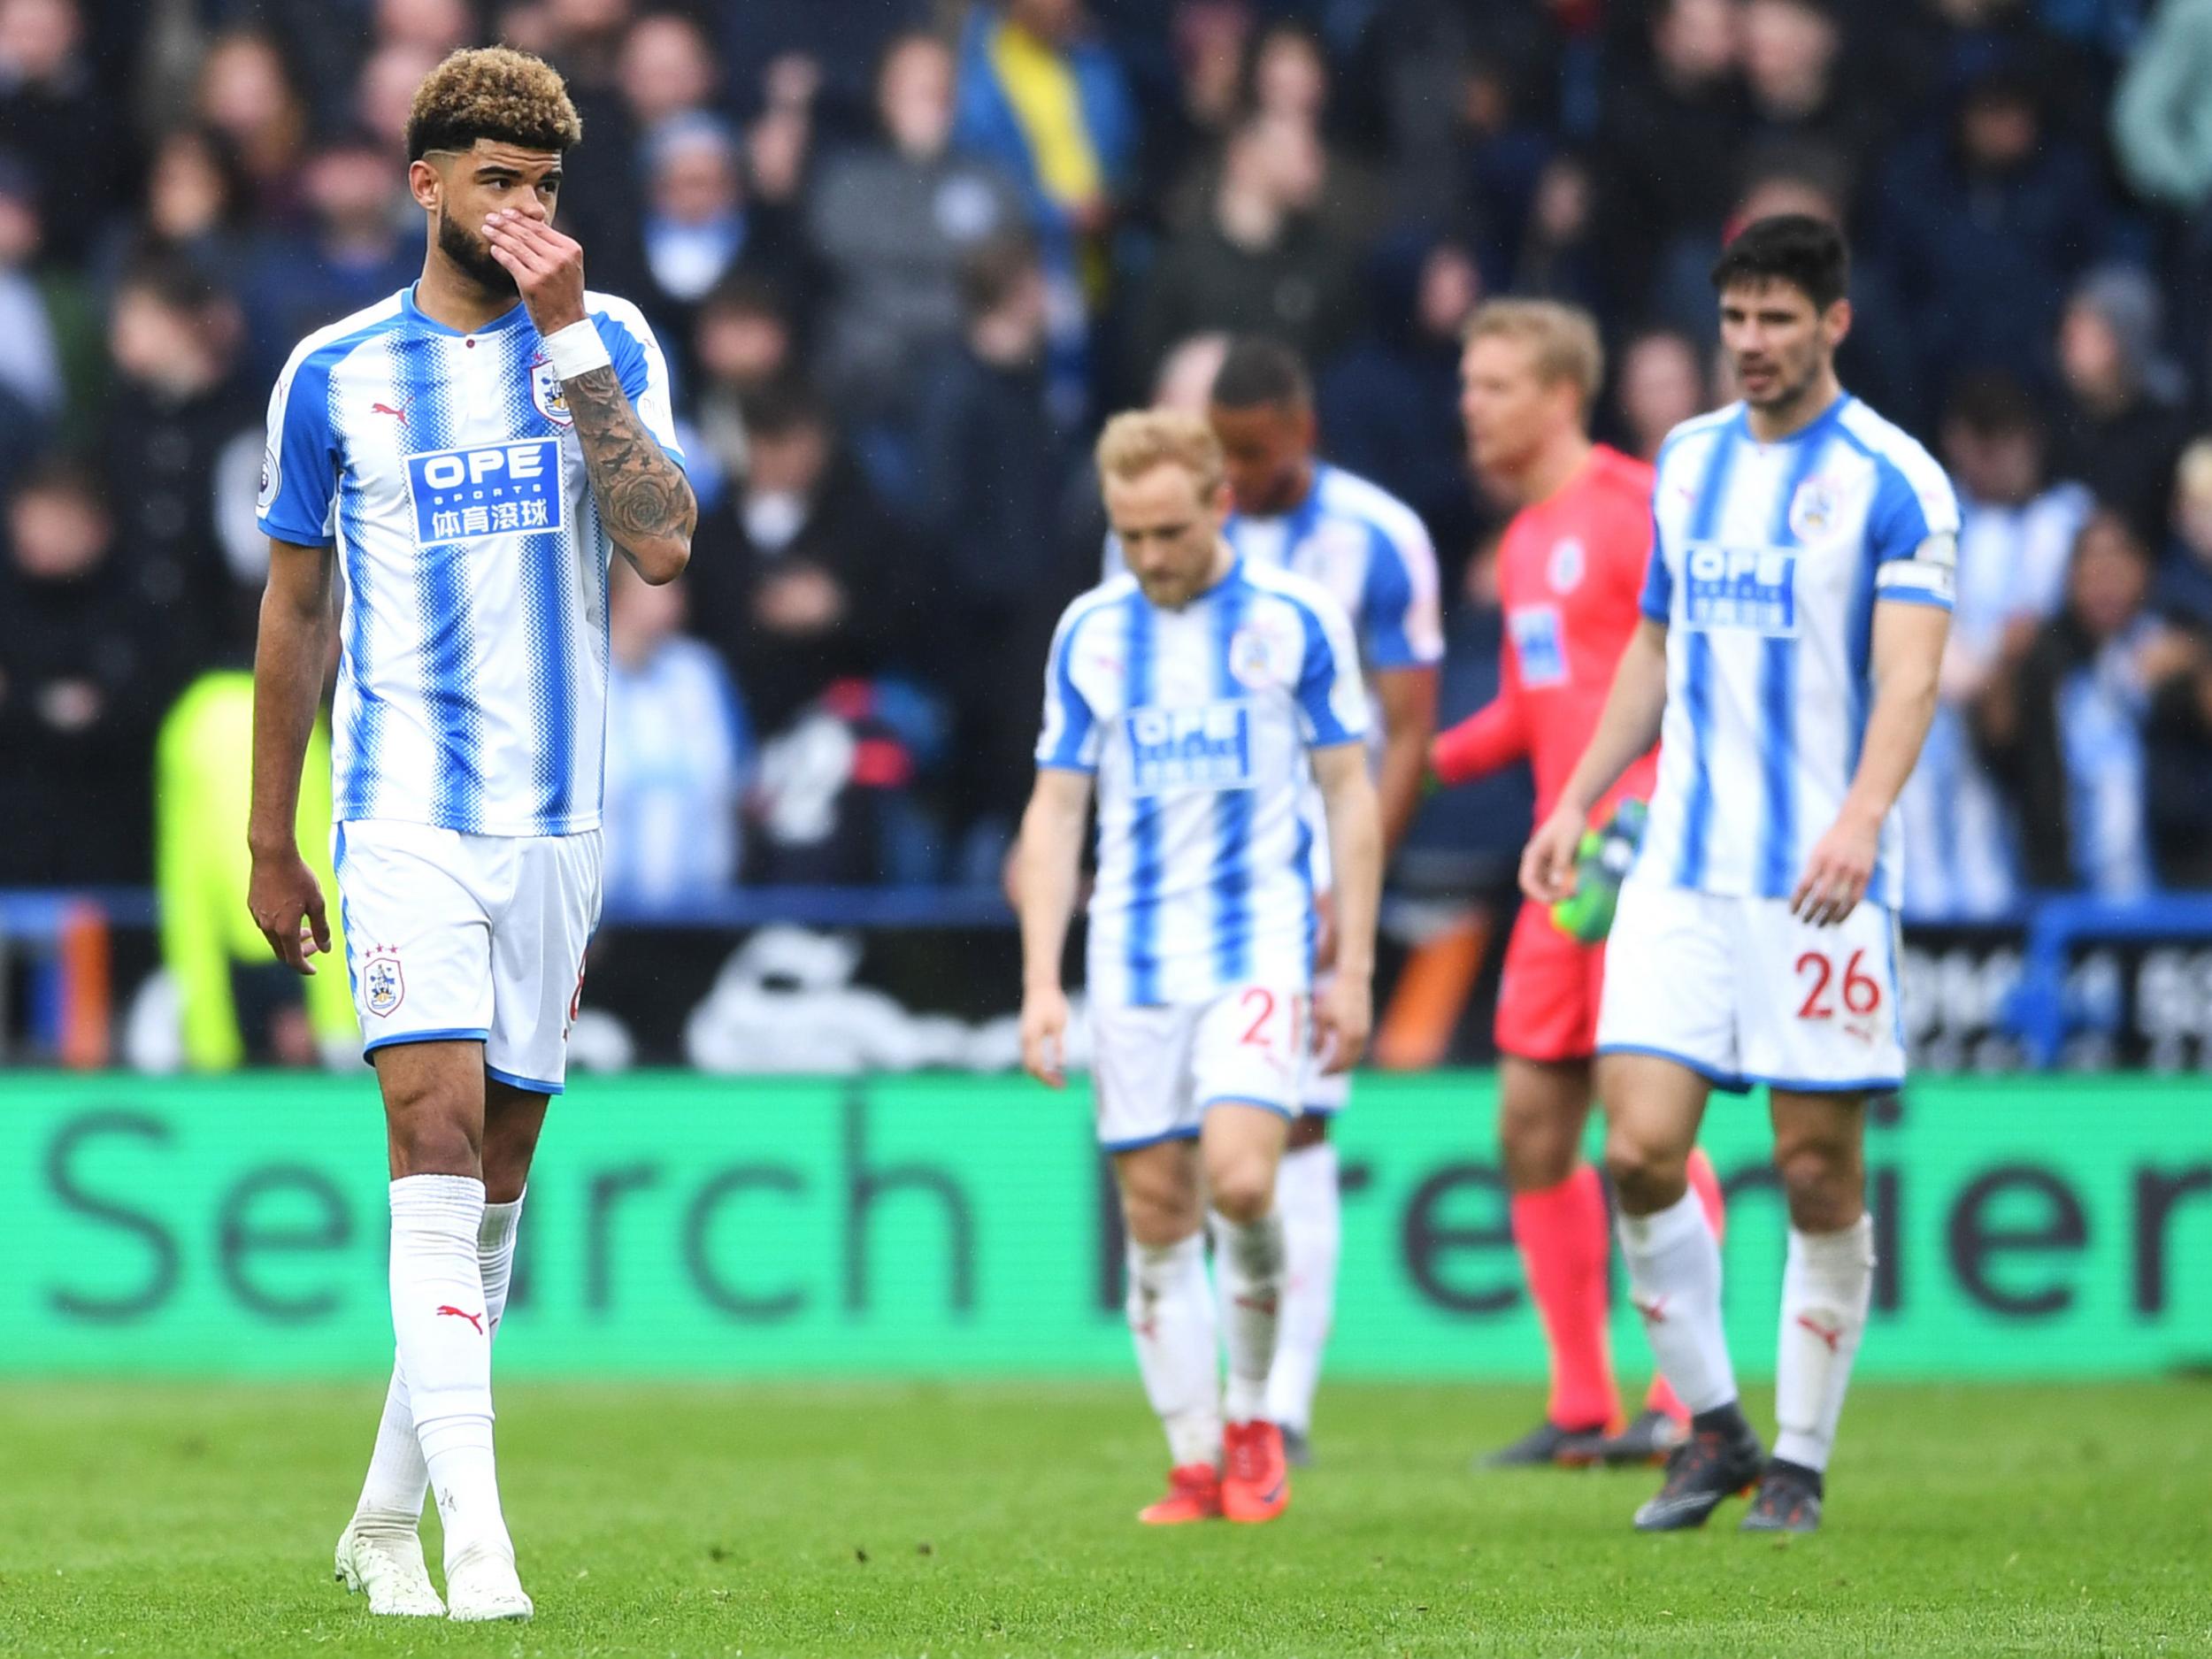 Huddersfield have three games to save themselves